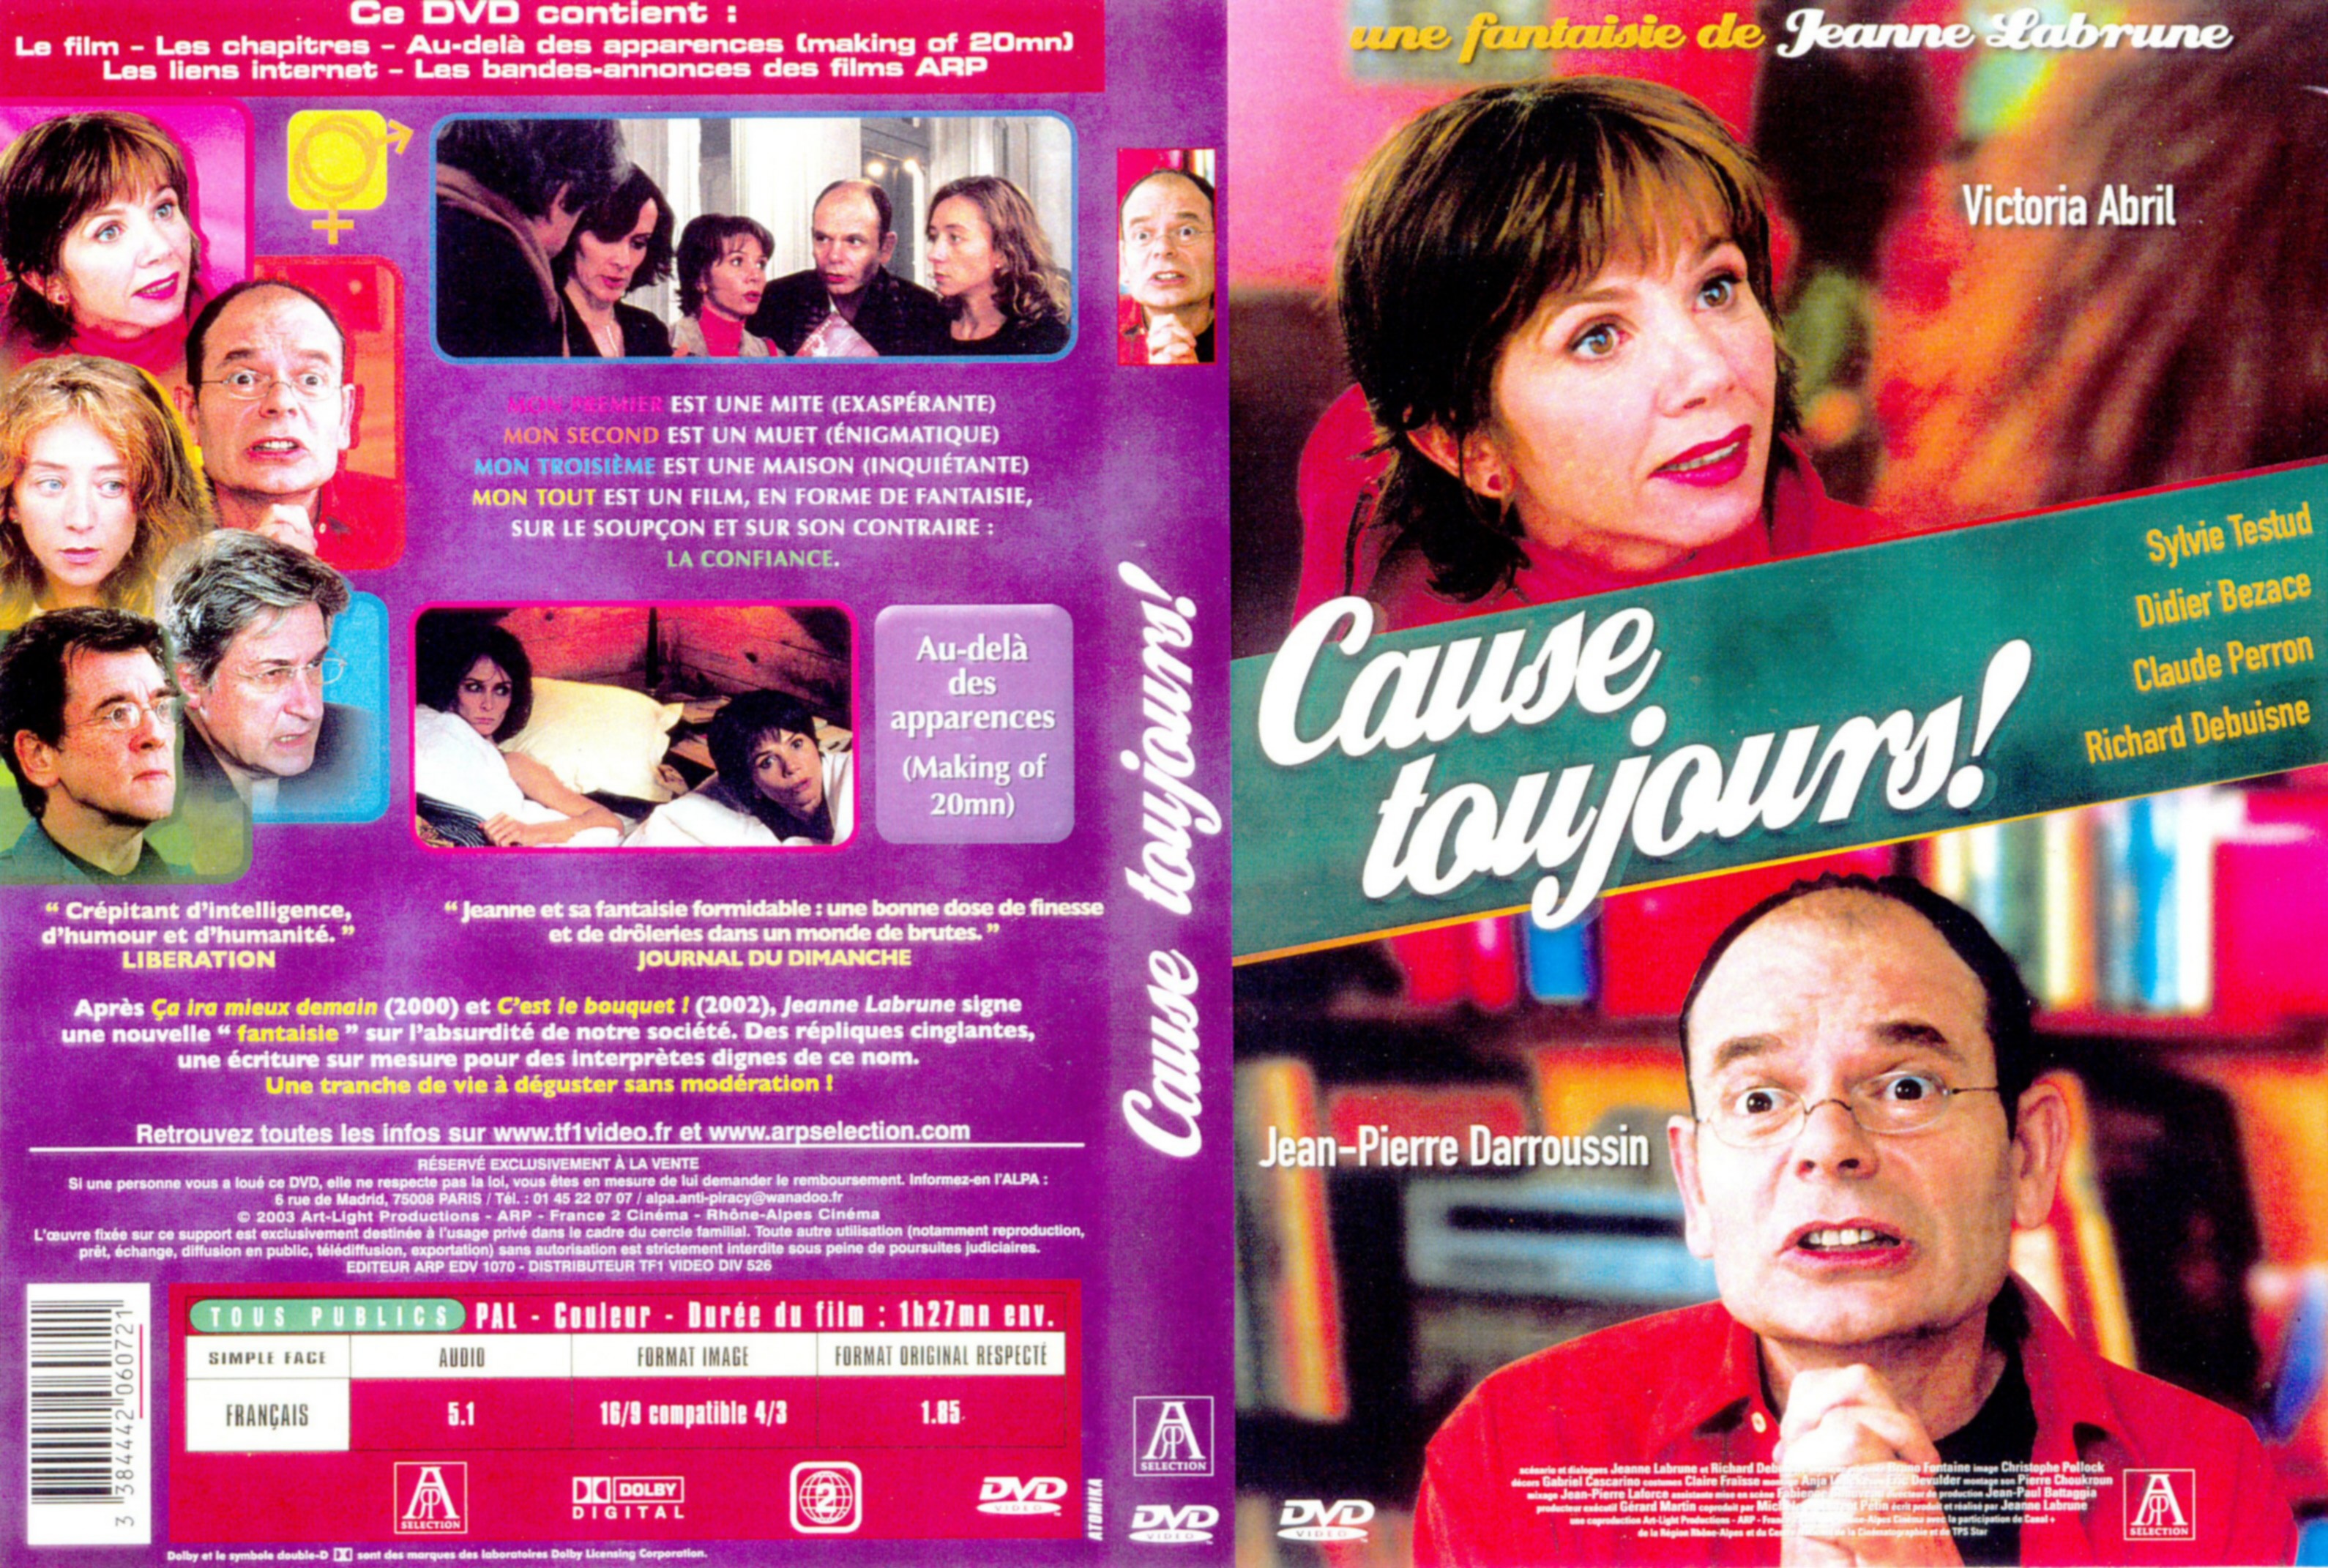 Jaquette DVD Cause toujours